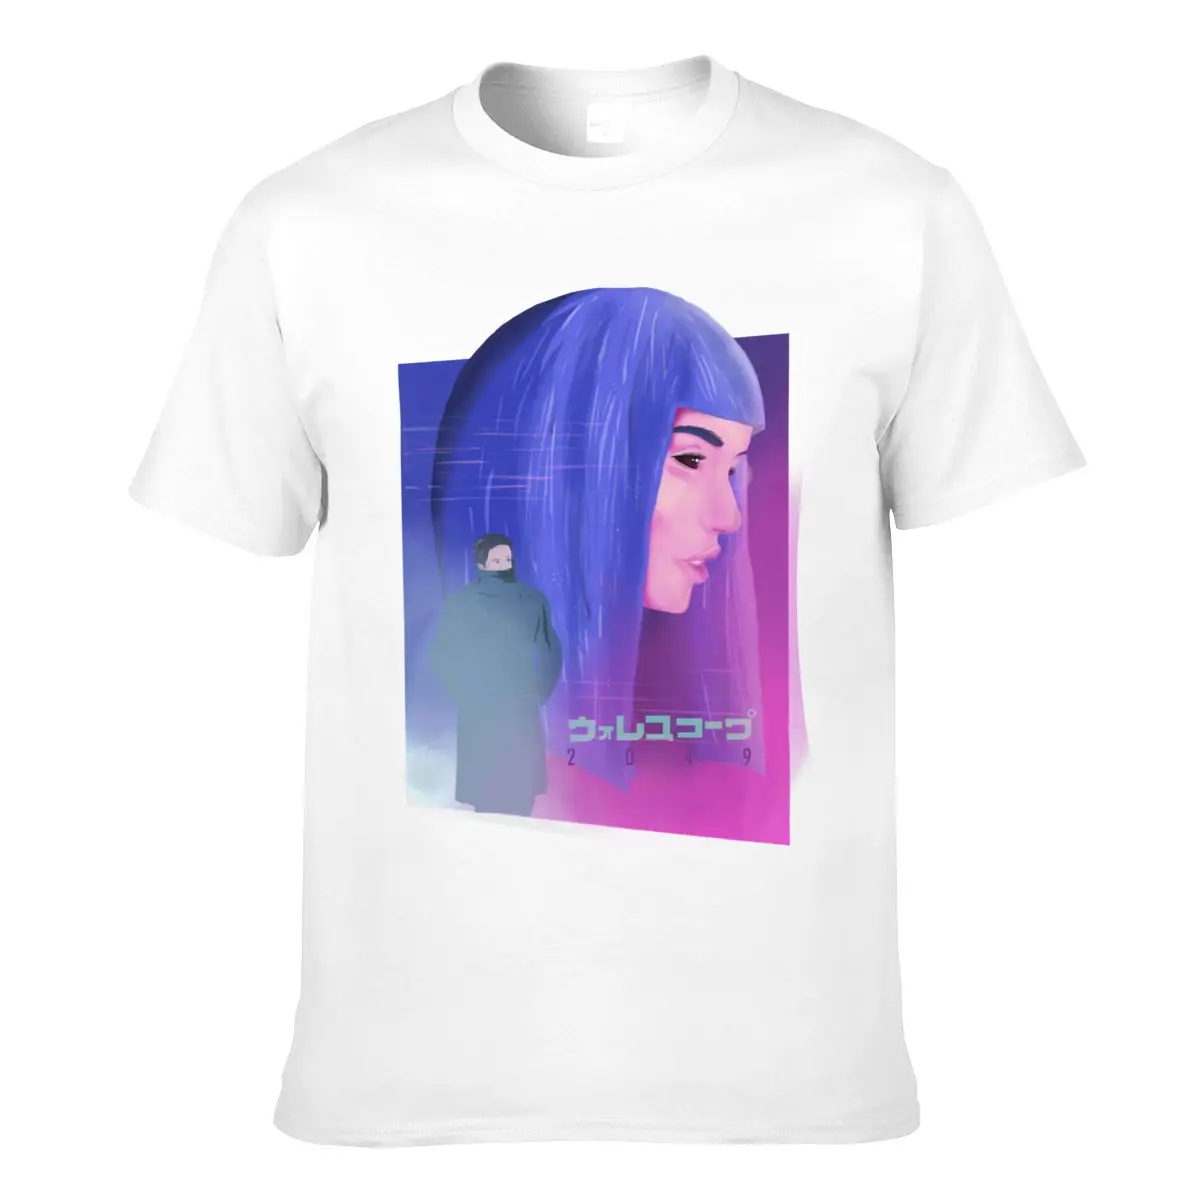 

Blade Runner 2049 Joi T Shirt Cult Classic Movie Oversized Awesome T-Shirt Graphic 100 Percent Cotton Tshirt Men